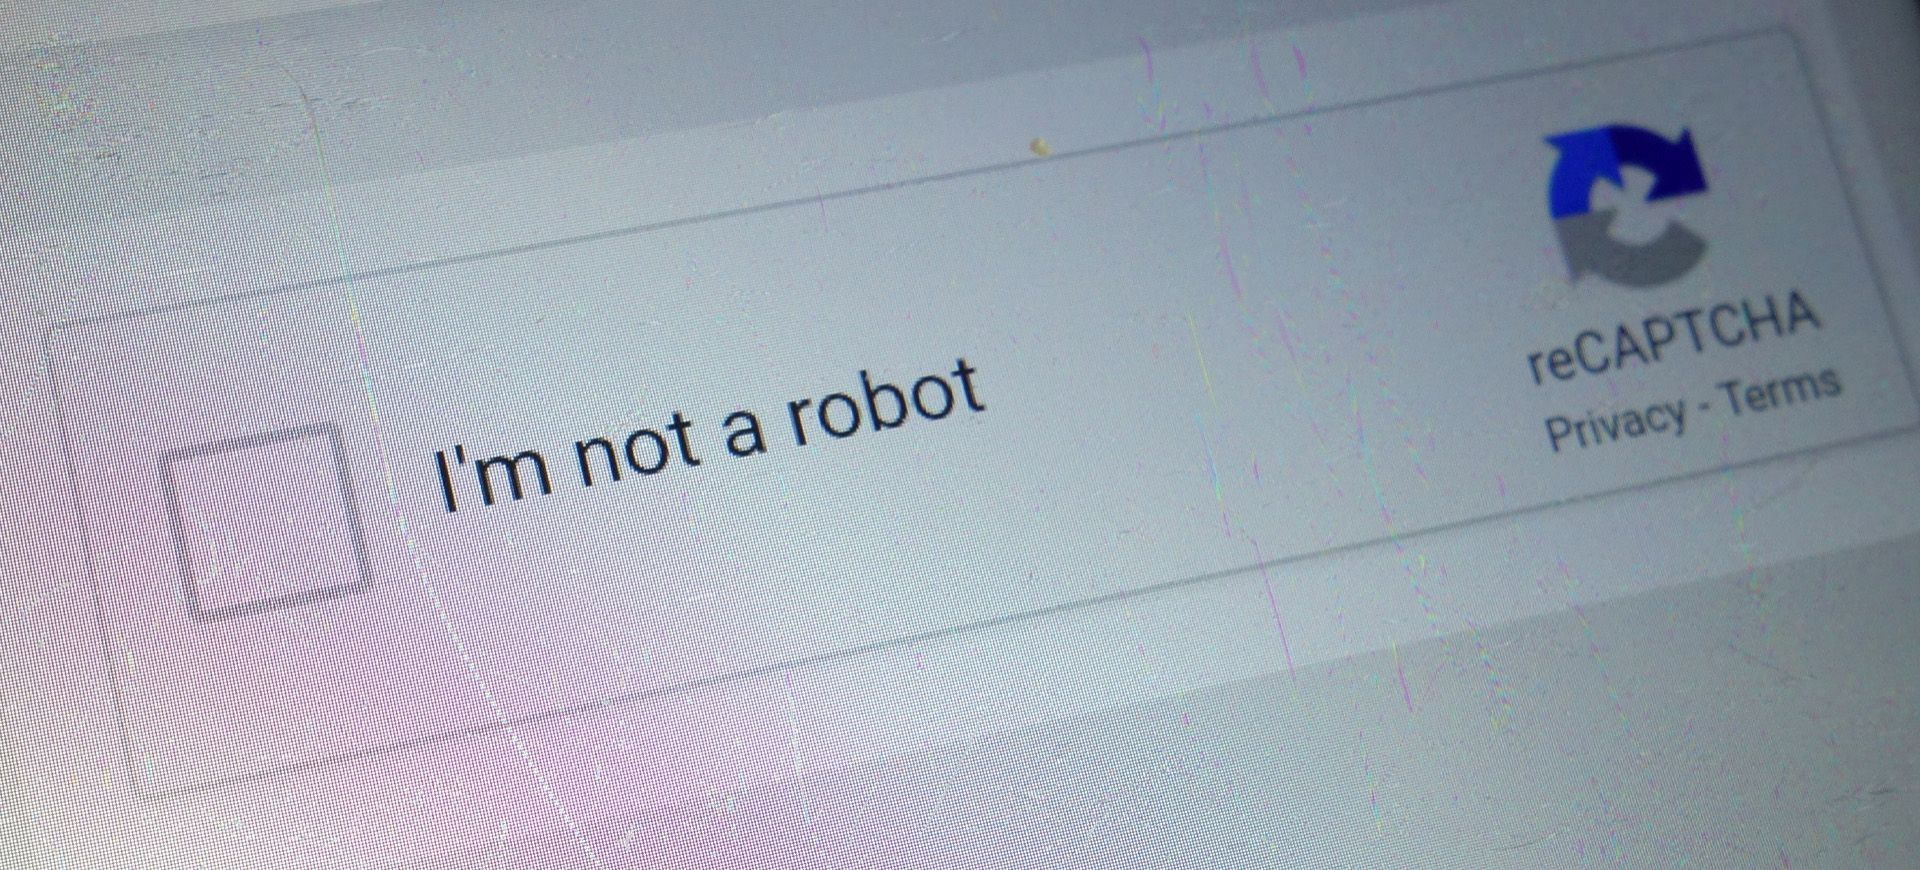 'I'm Not A Robot' - Why Do Websites Use This?